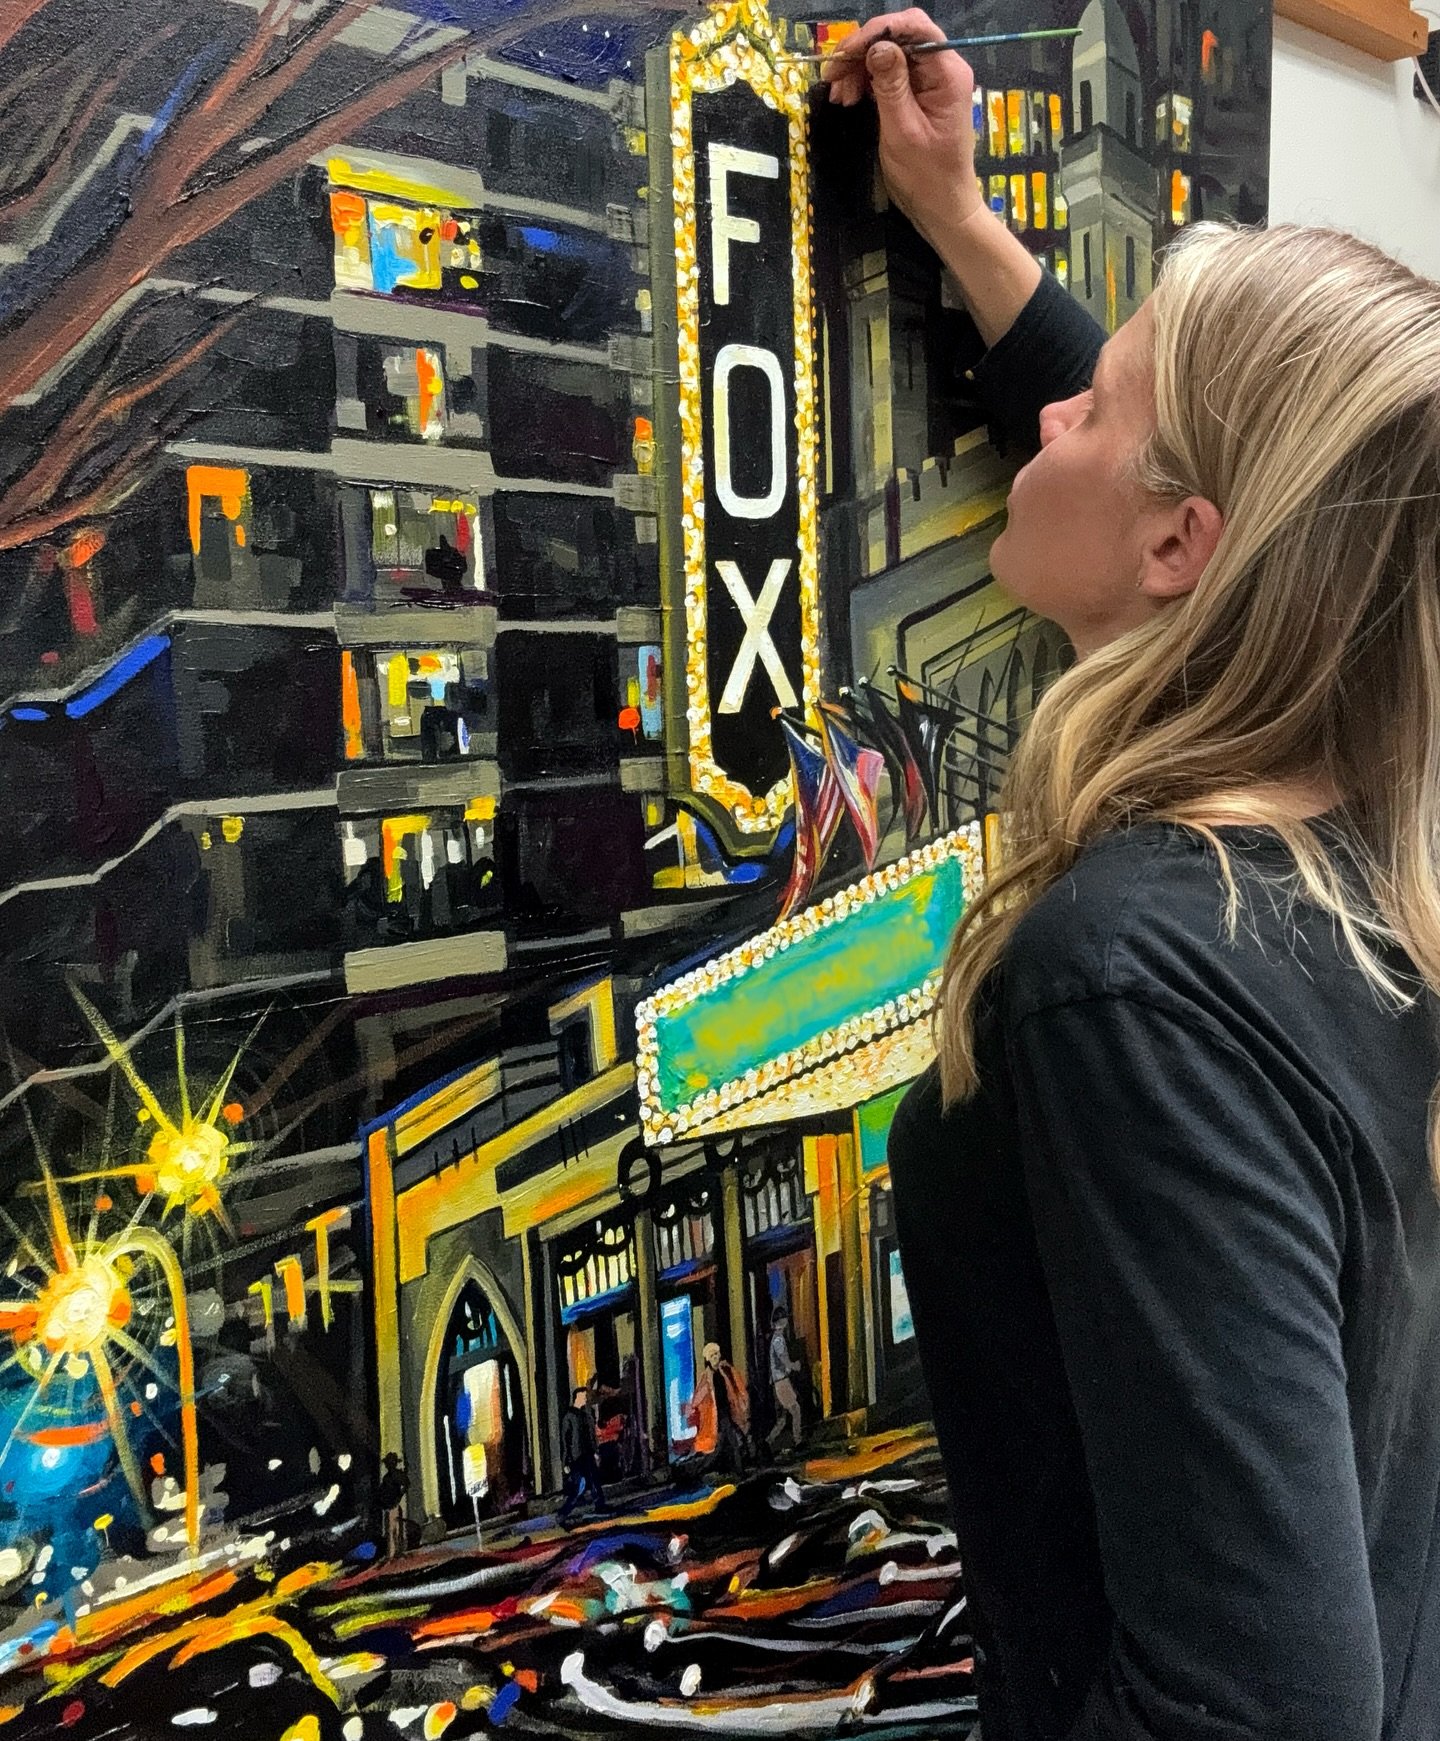 New commissioned piece almost complete of the Fox Theatre in Atlanta @thefoxtheatre . I&rsquo;ve always loved painting city inspired pieces and capturing the vibrant nightlife.

This has been a fun one to work on to commemorate a special @widespreadp